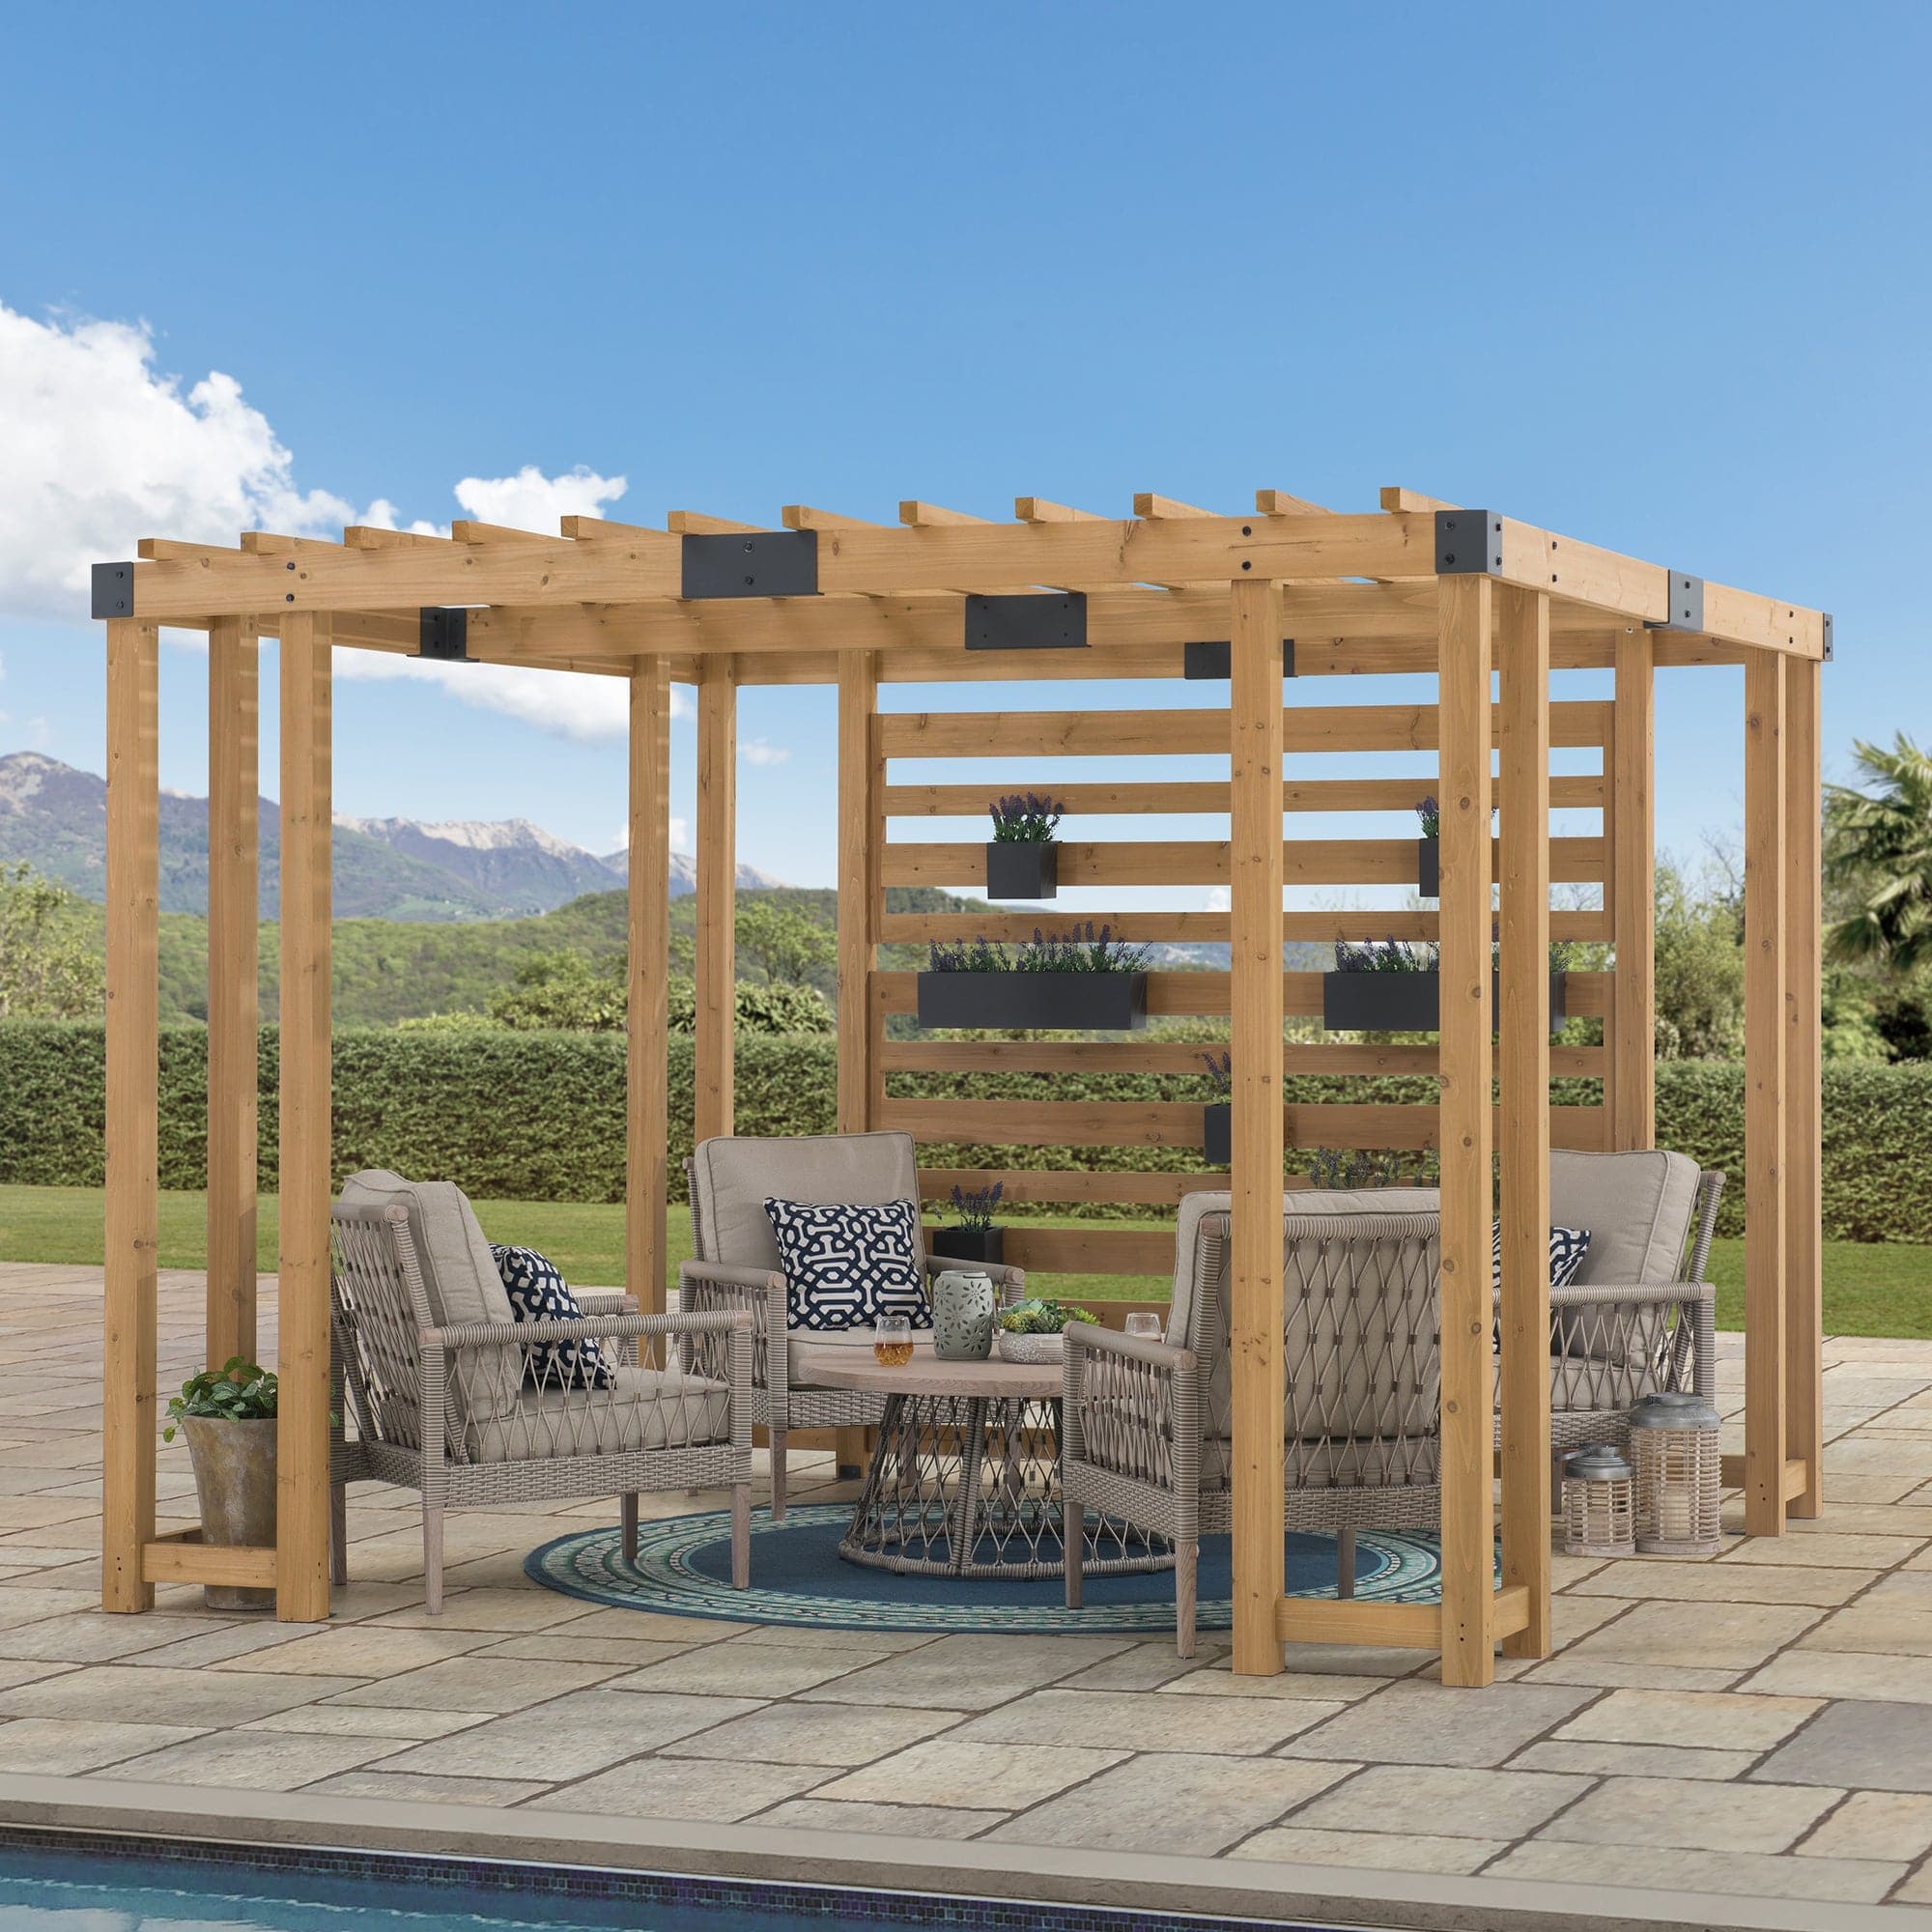 Sunjoy Outdoor Patio 10x10 Modern Wooden Privacy Screen Pergola Kit with Adjustable Hanging Planters